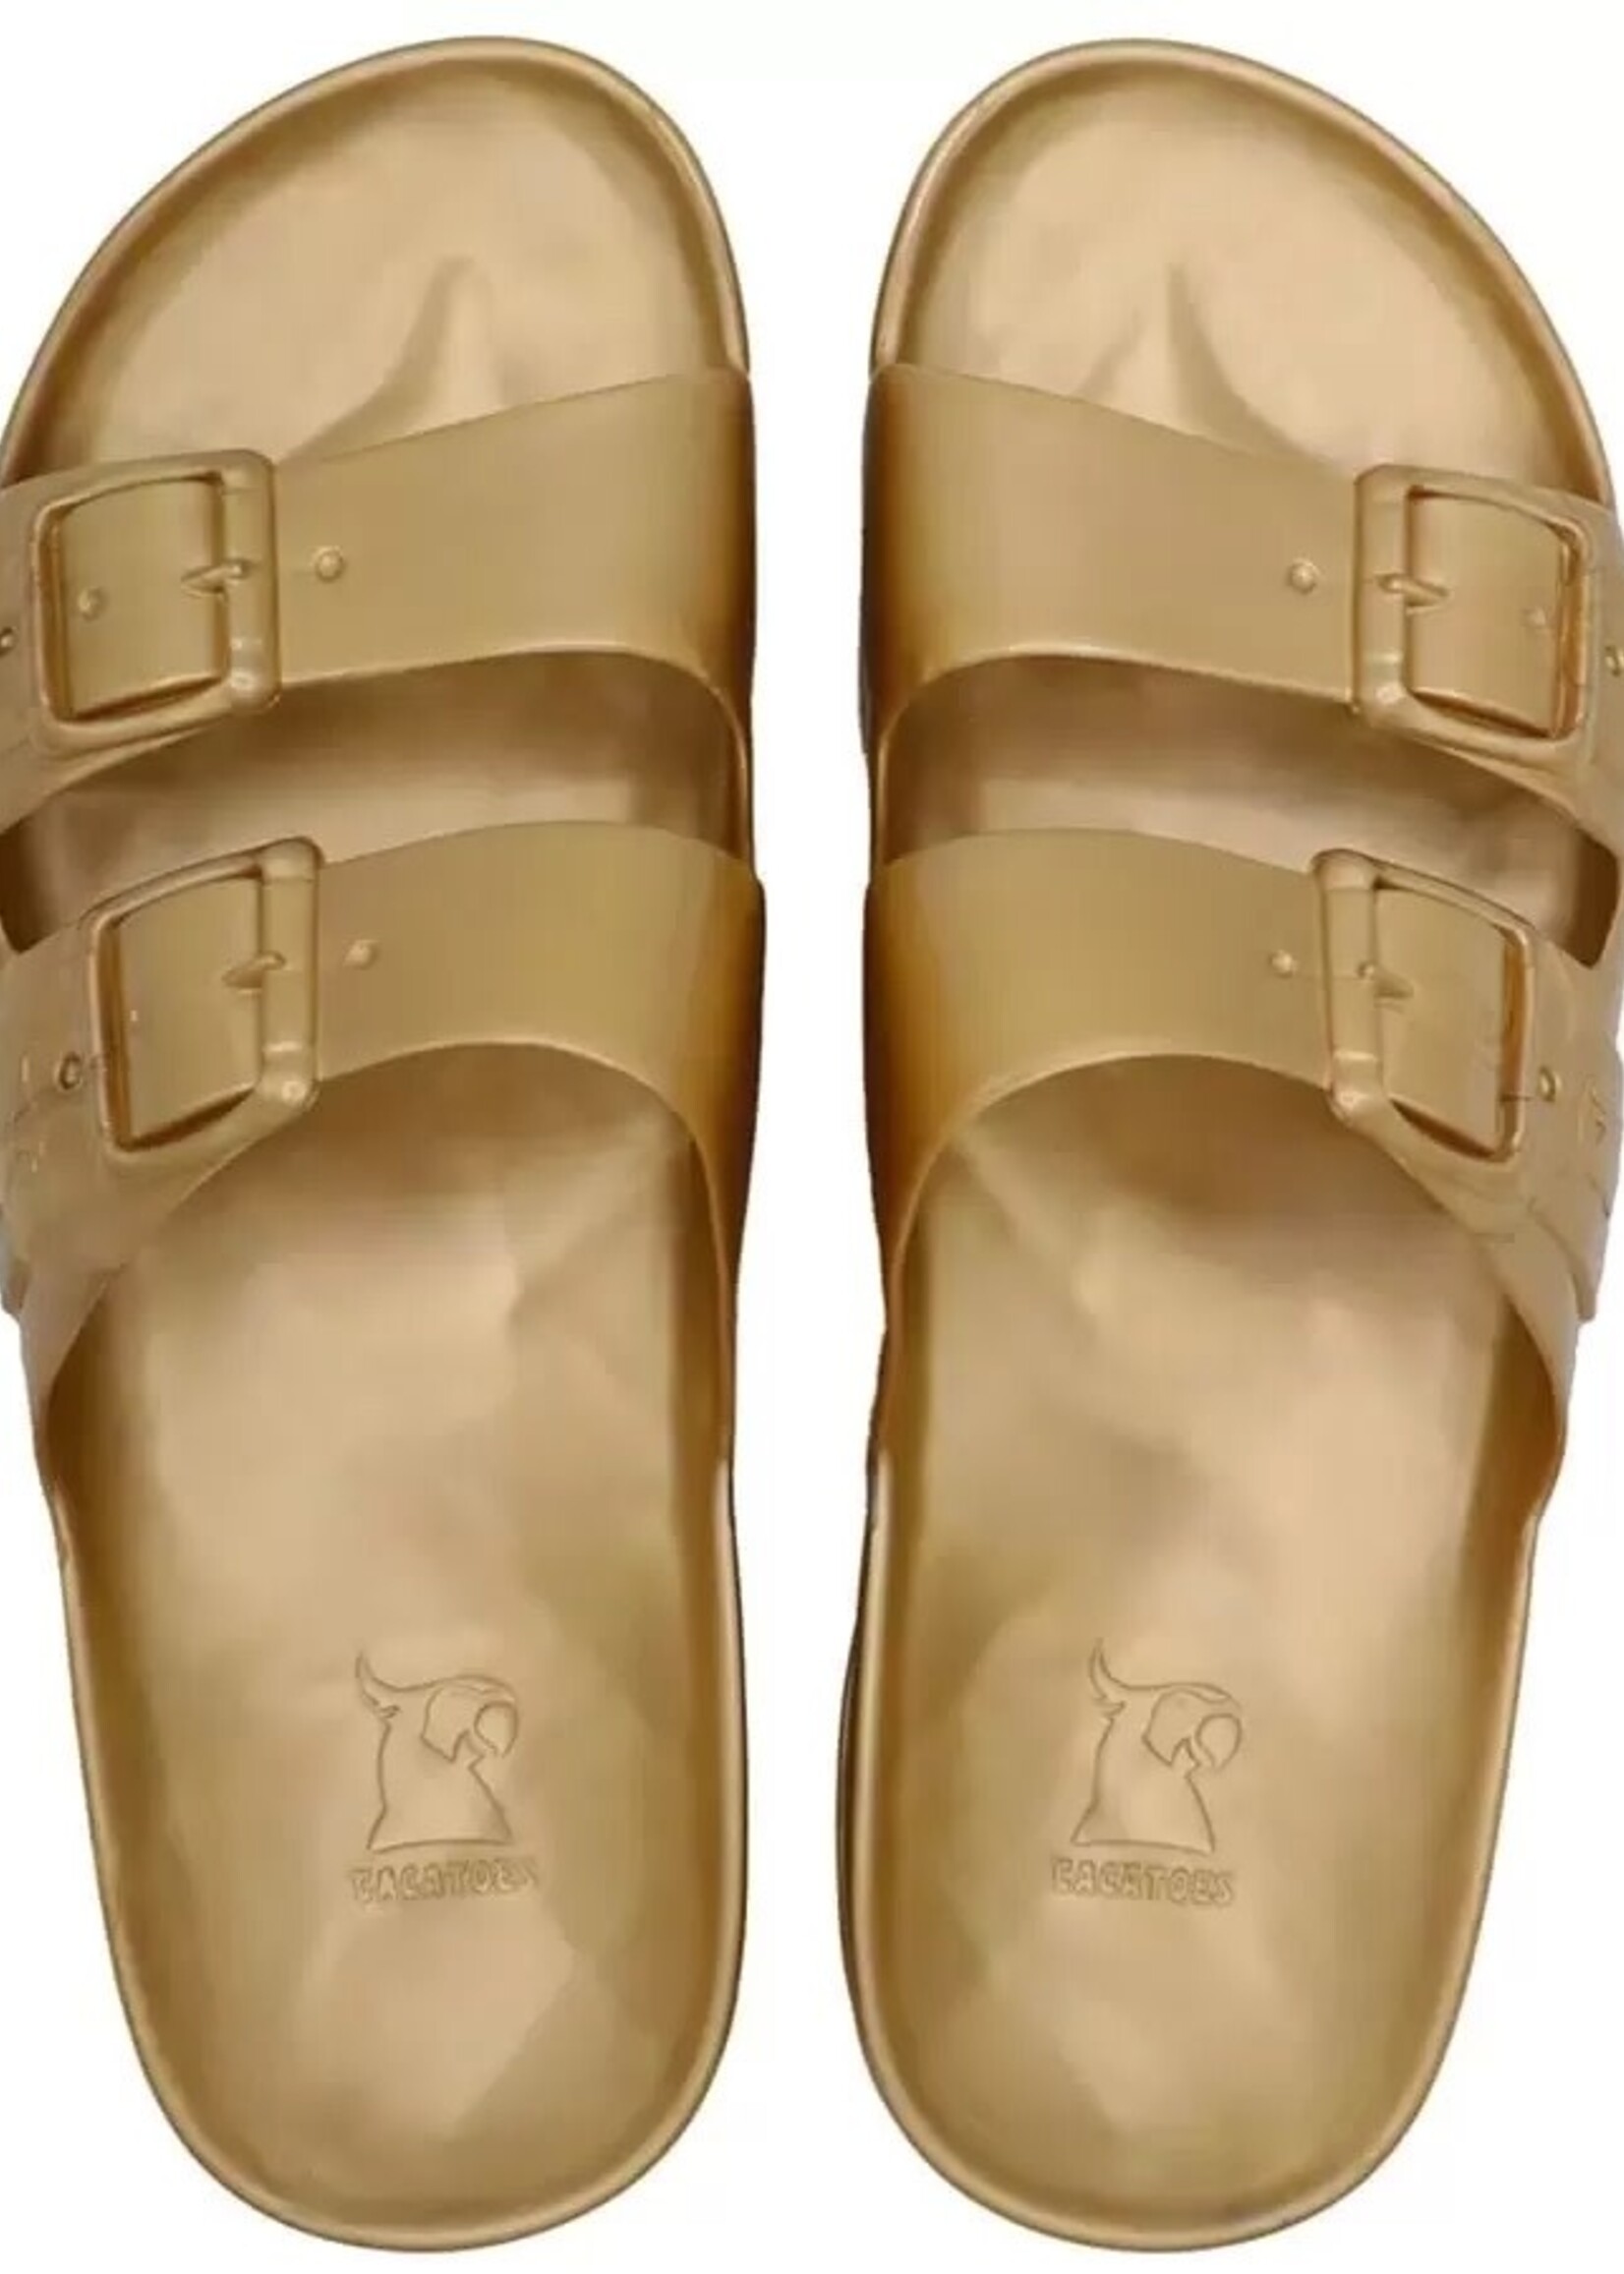 Cacatoes Cacatoes Anjo slippers metallic Gold